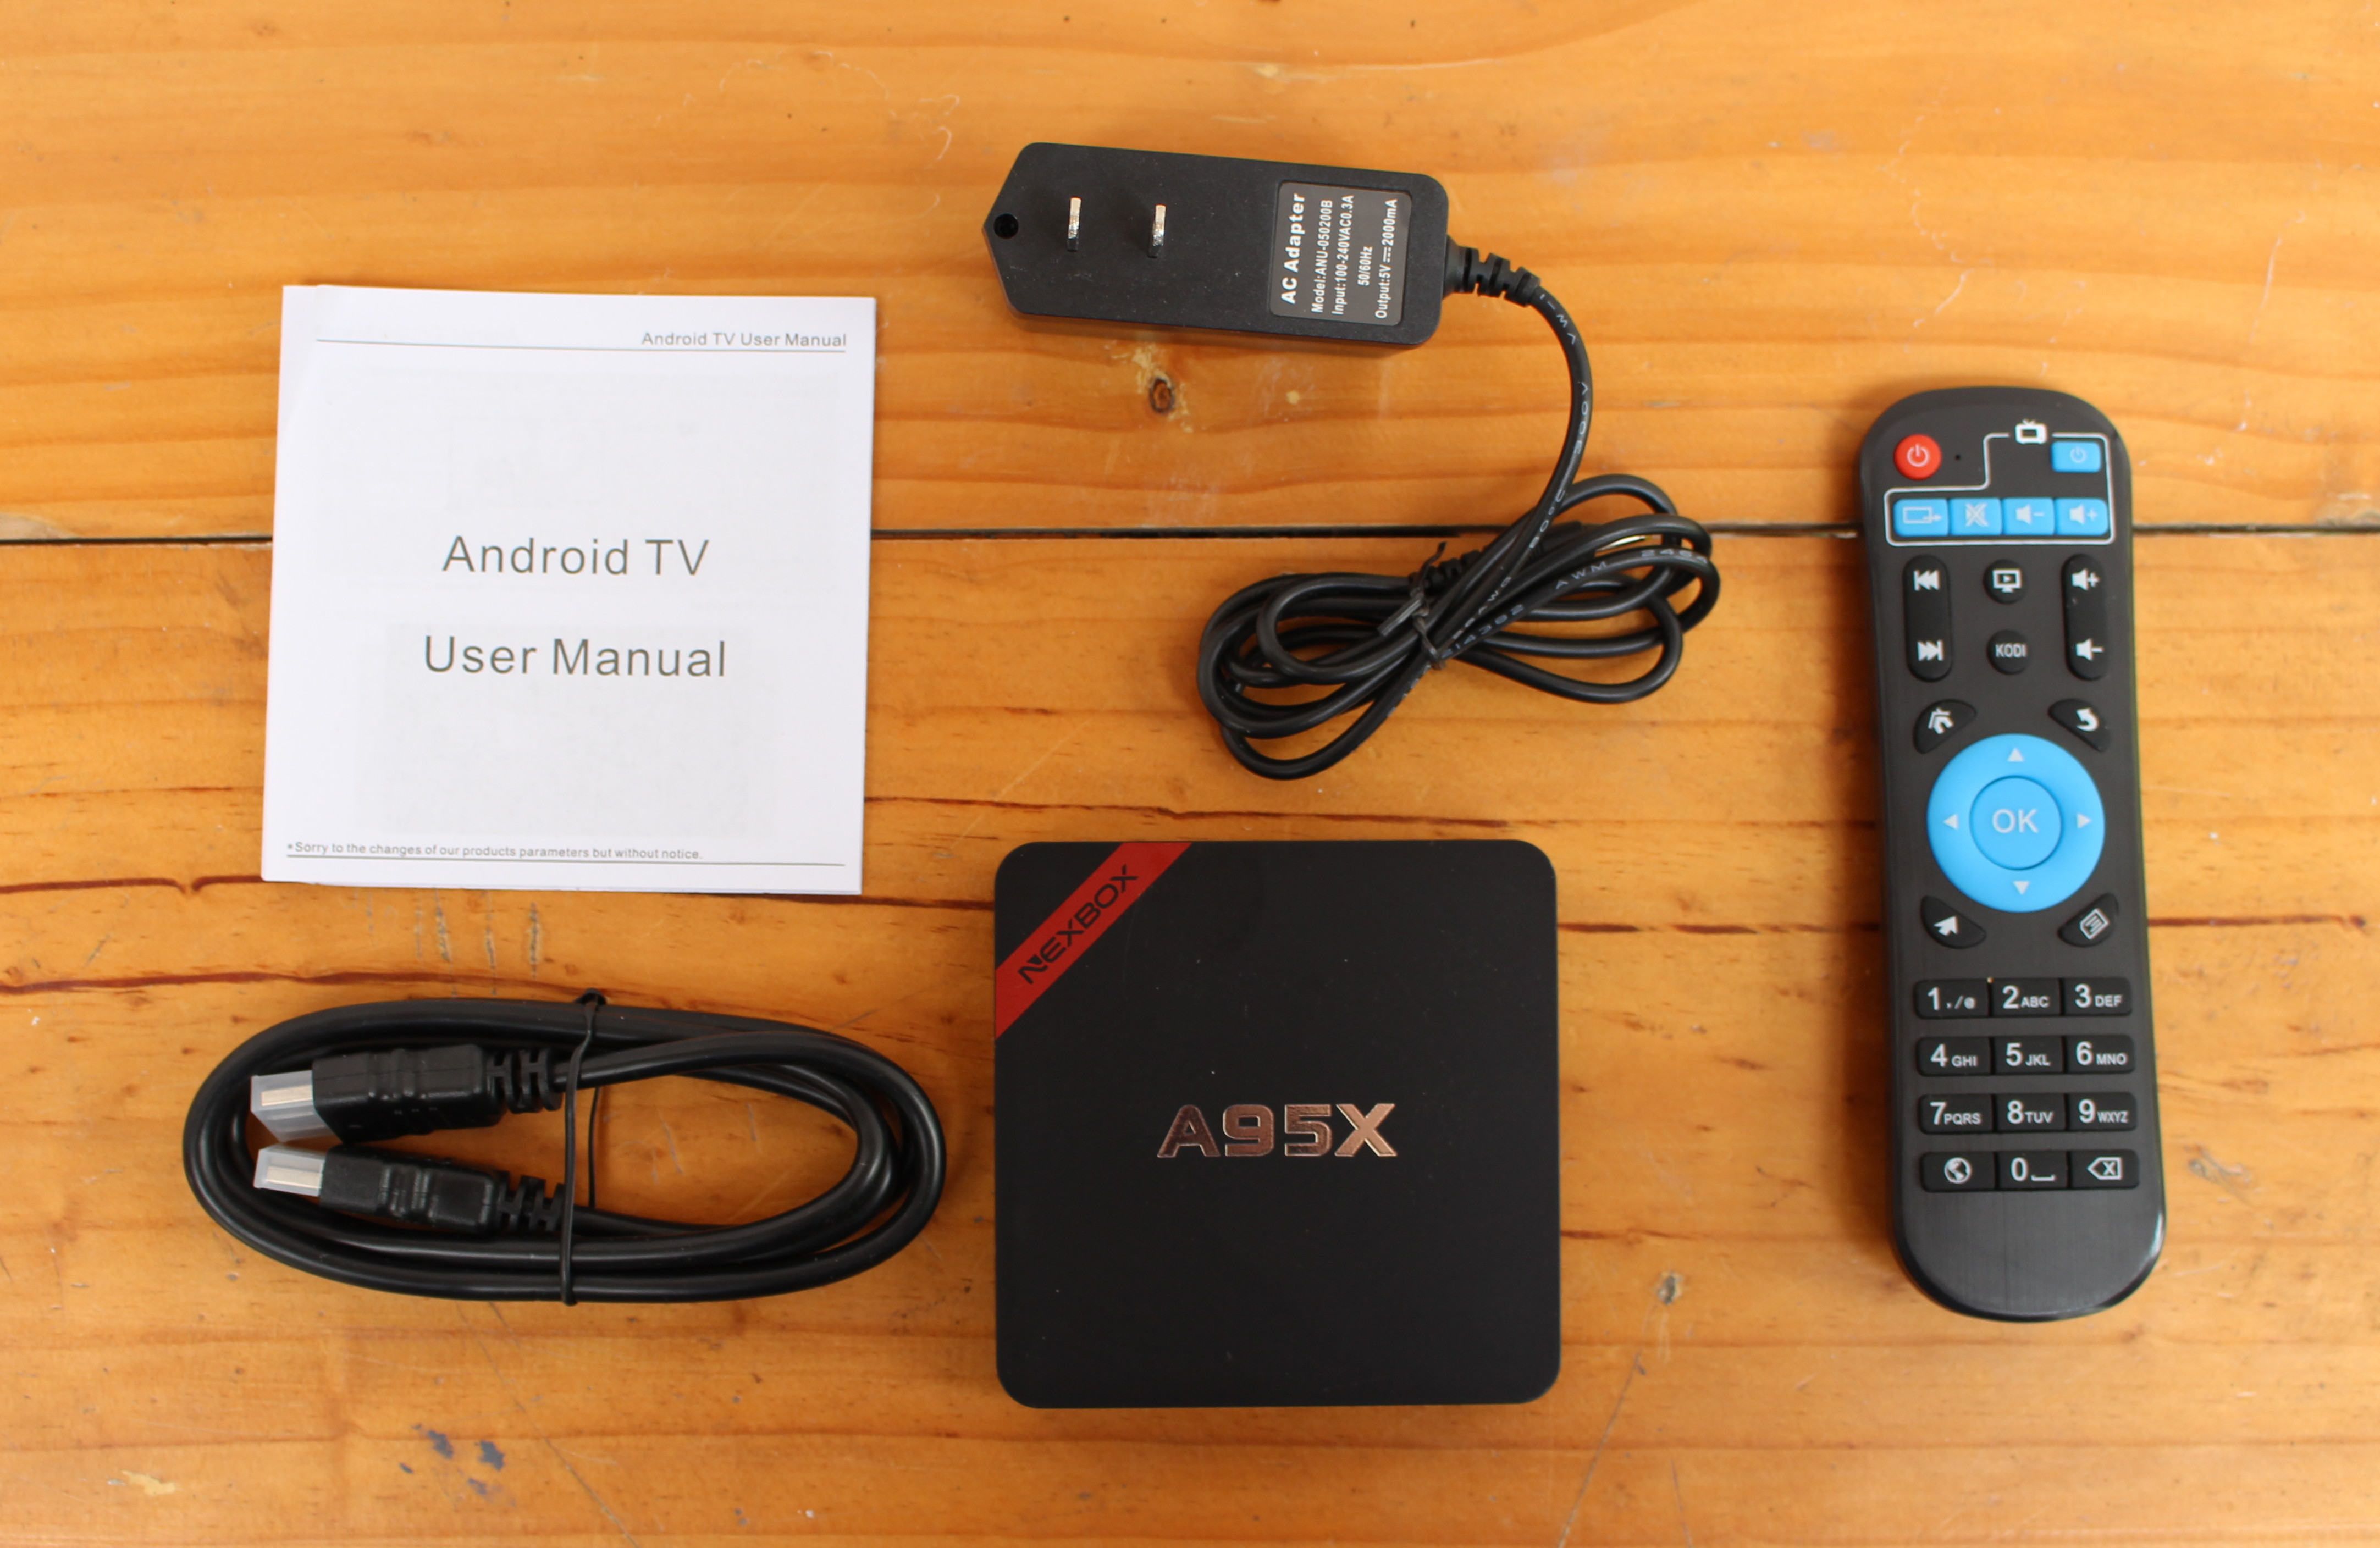 NEXBOX A95X (S905X) Android TV Box Review – Part 1: Unboxing and Teardown